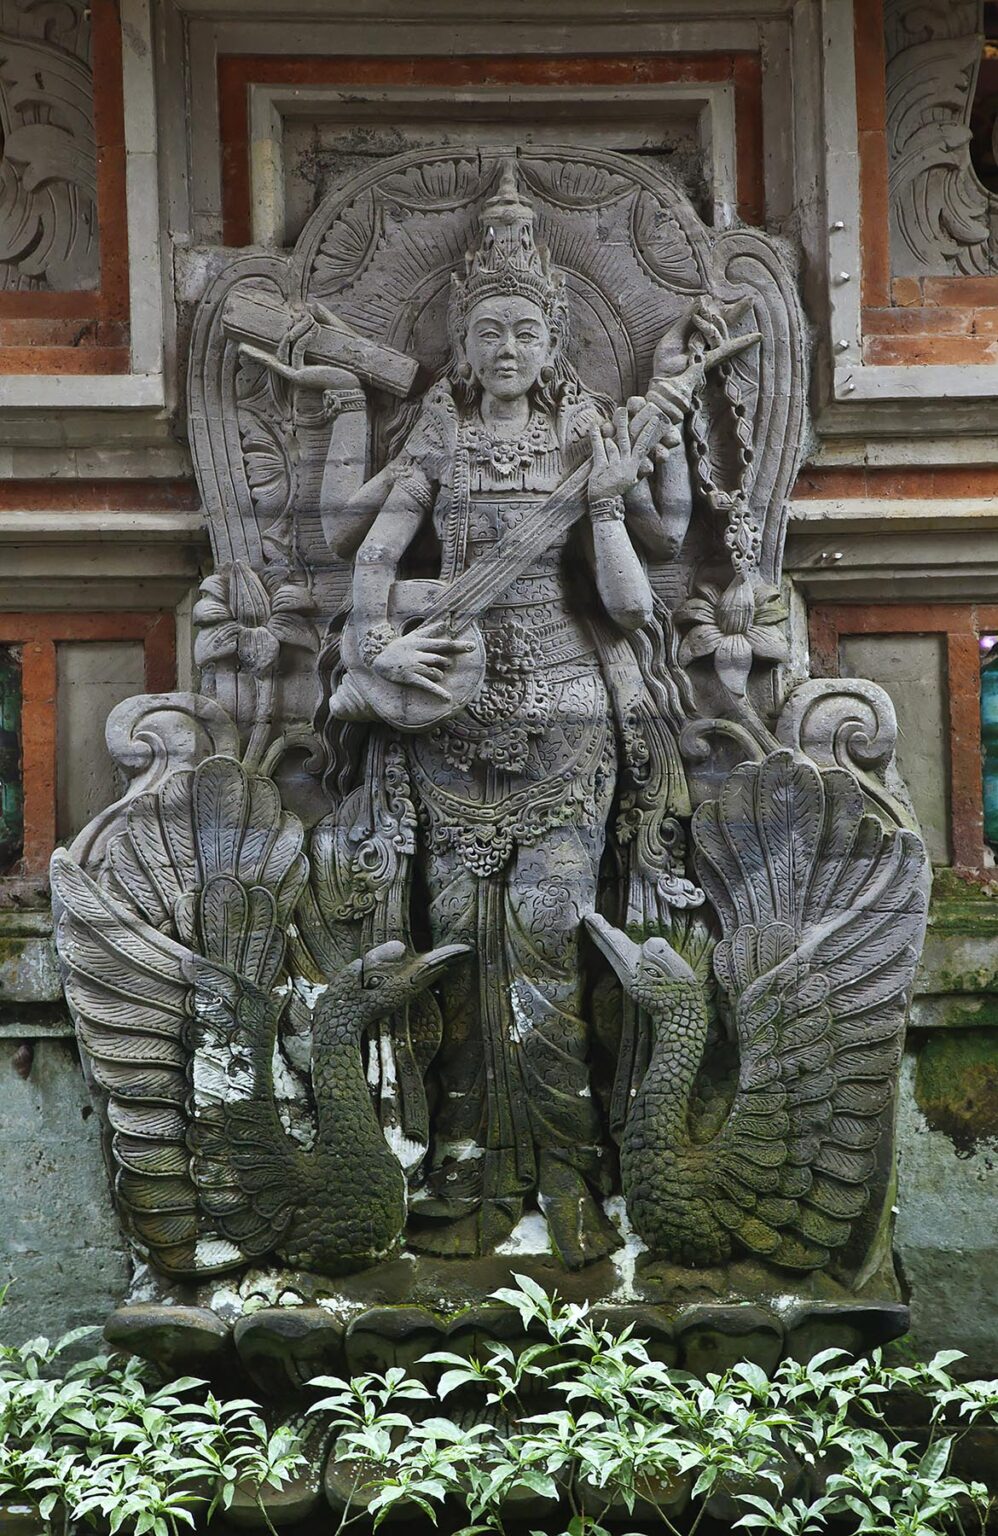 A stone carving of SARASWATI, the goddess of knowledge, music and the arts at the entrance of PURA DESA - UBUD, BALI, INDONESIA